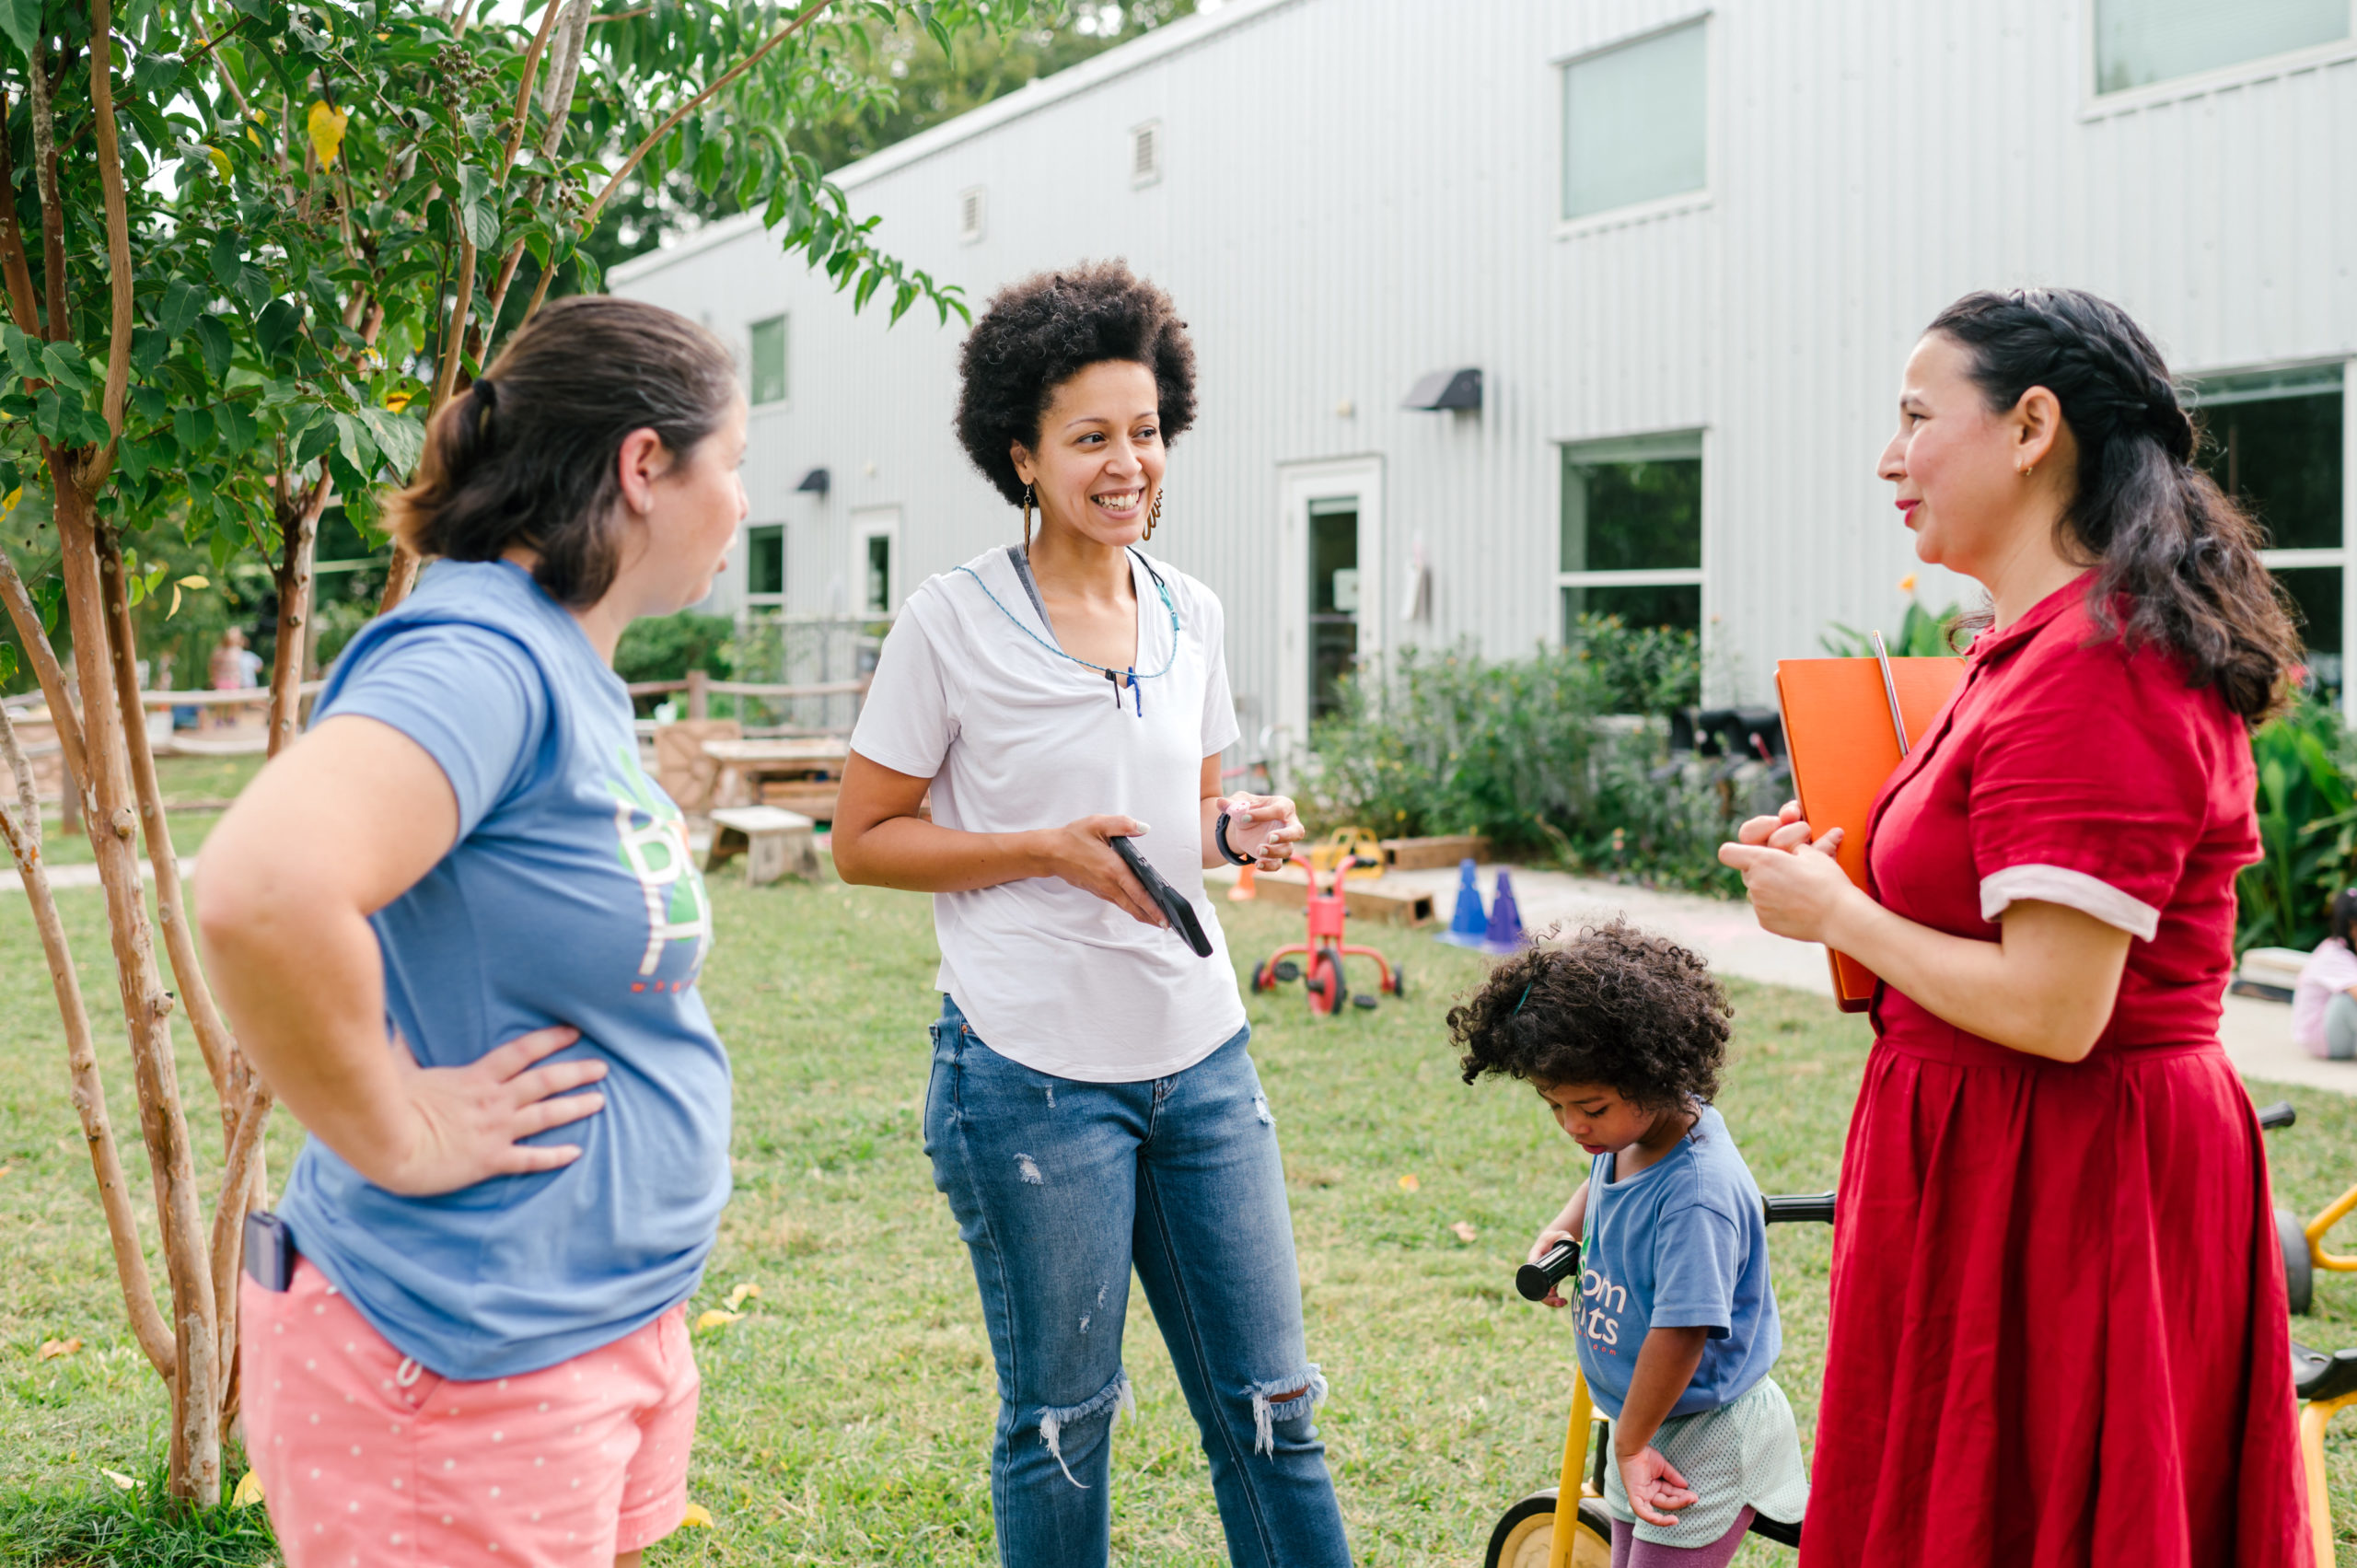 Photo of woman child development coach in a beautiful red dress interacting with other teachers and coaches outside
